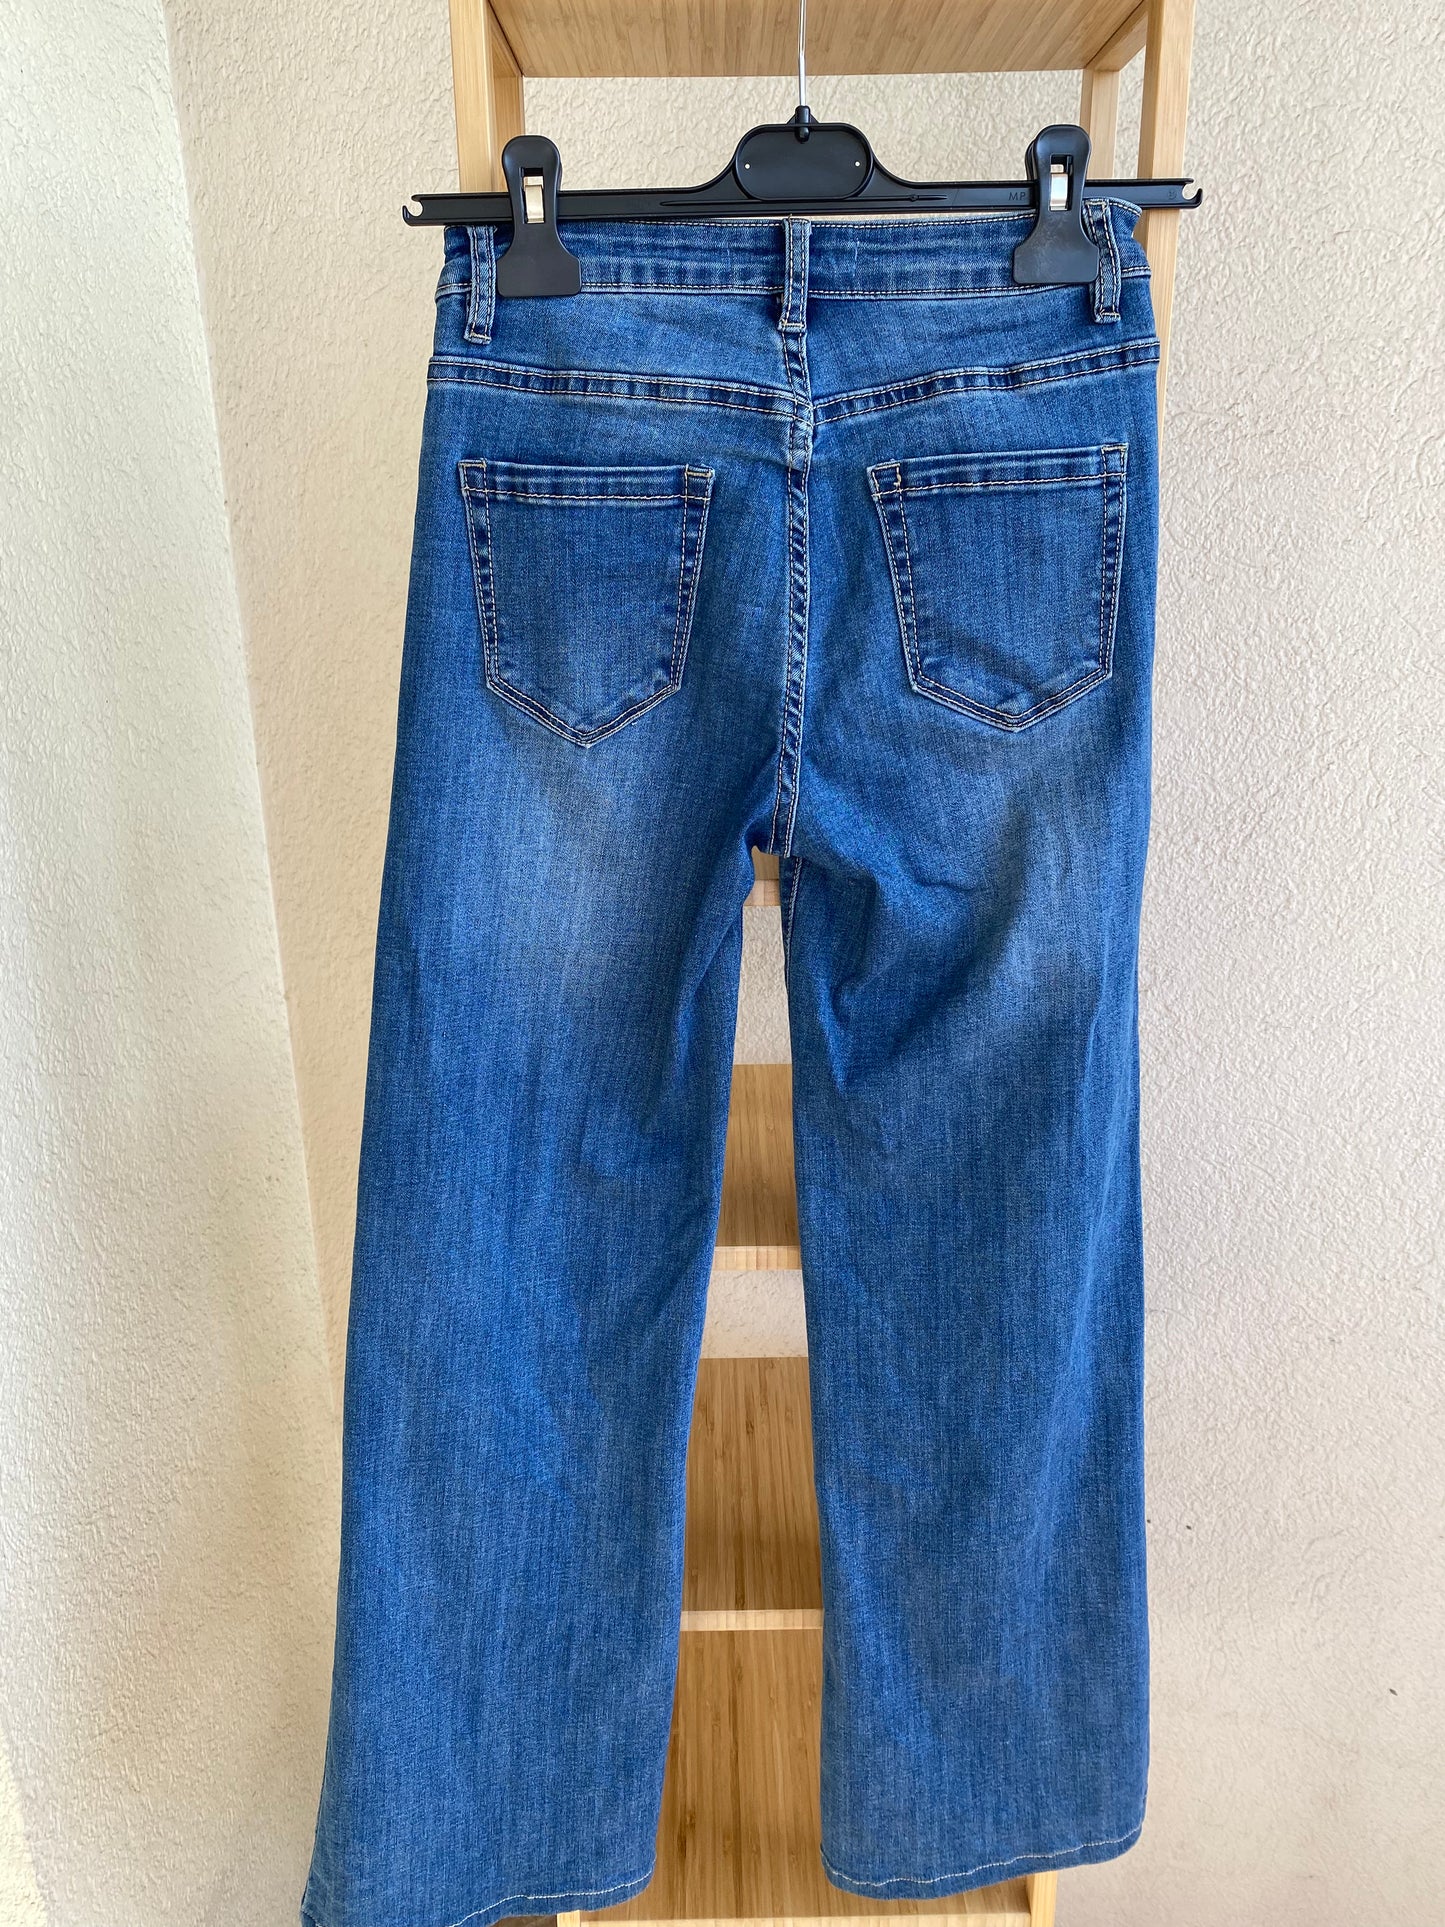 Jeans Nina Carter flare Taille 34